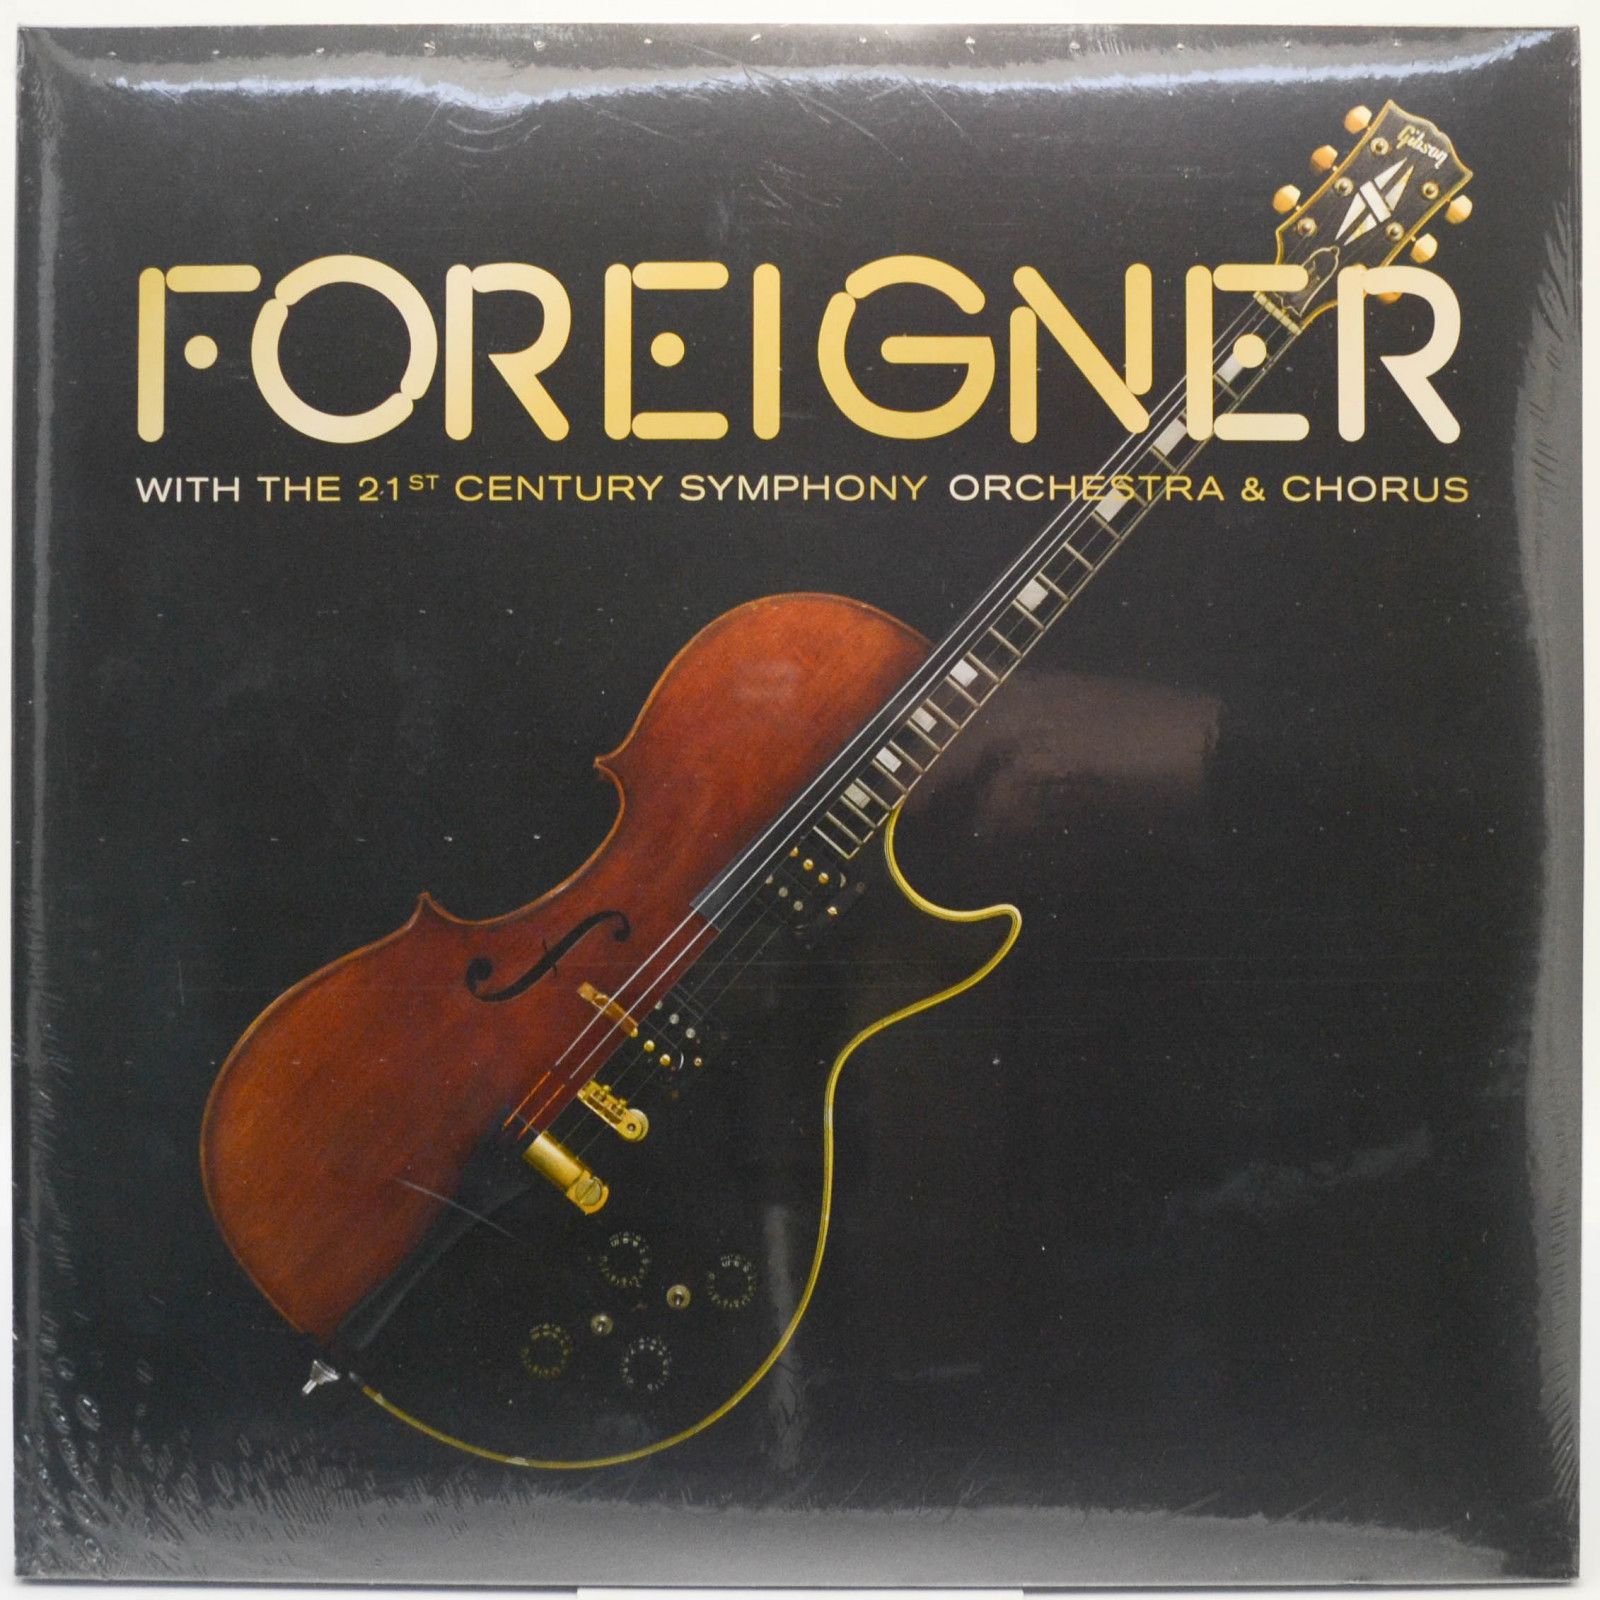 Foreigner — Foreigner With The 21st Century Symphony Orchestra & Chorus (2LP), 2018